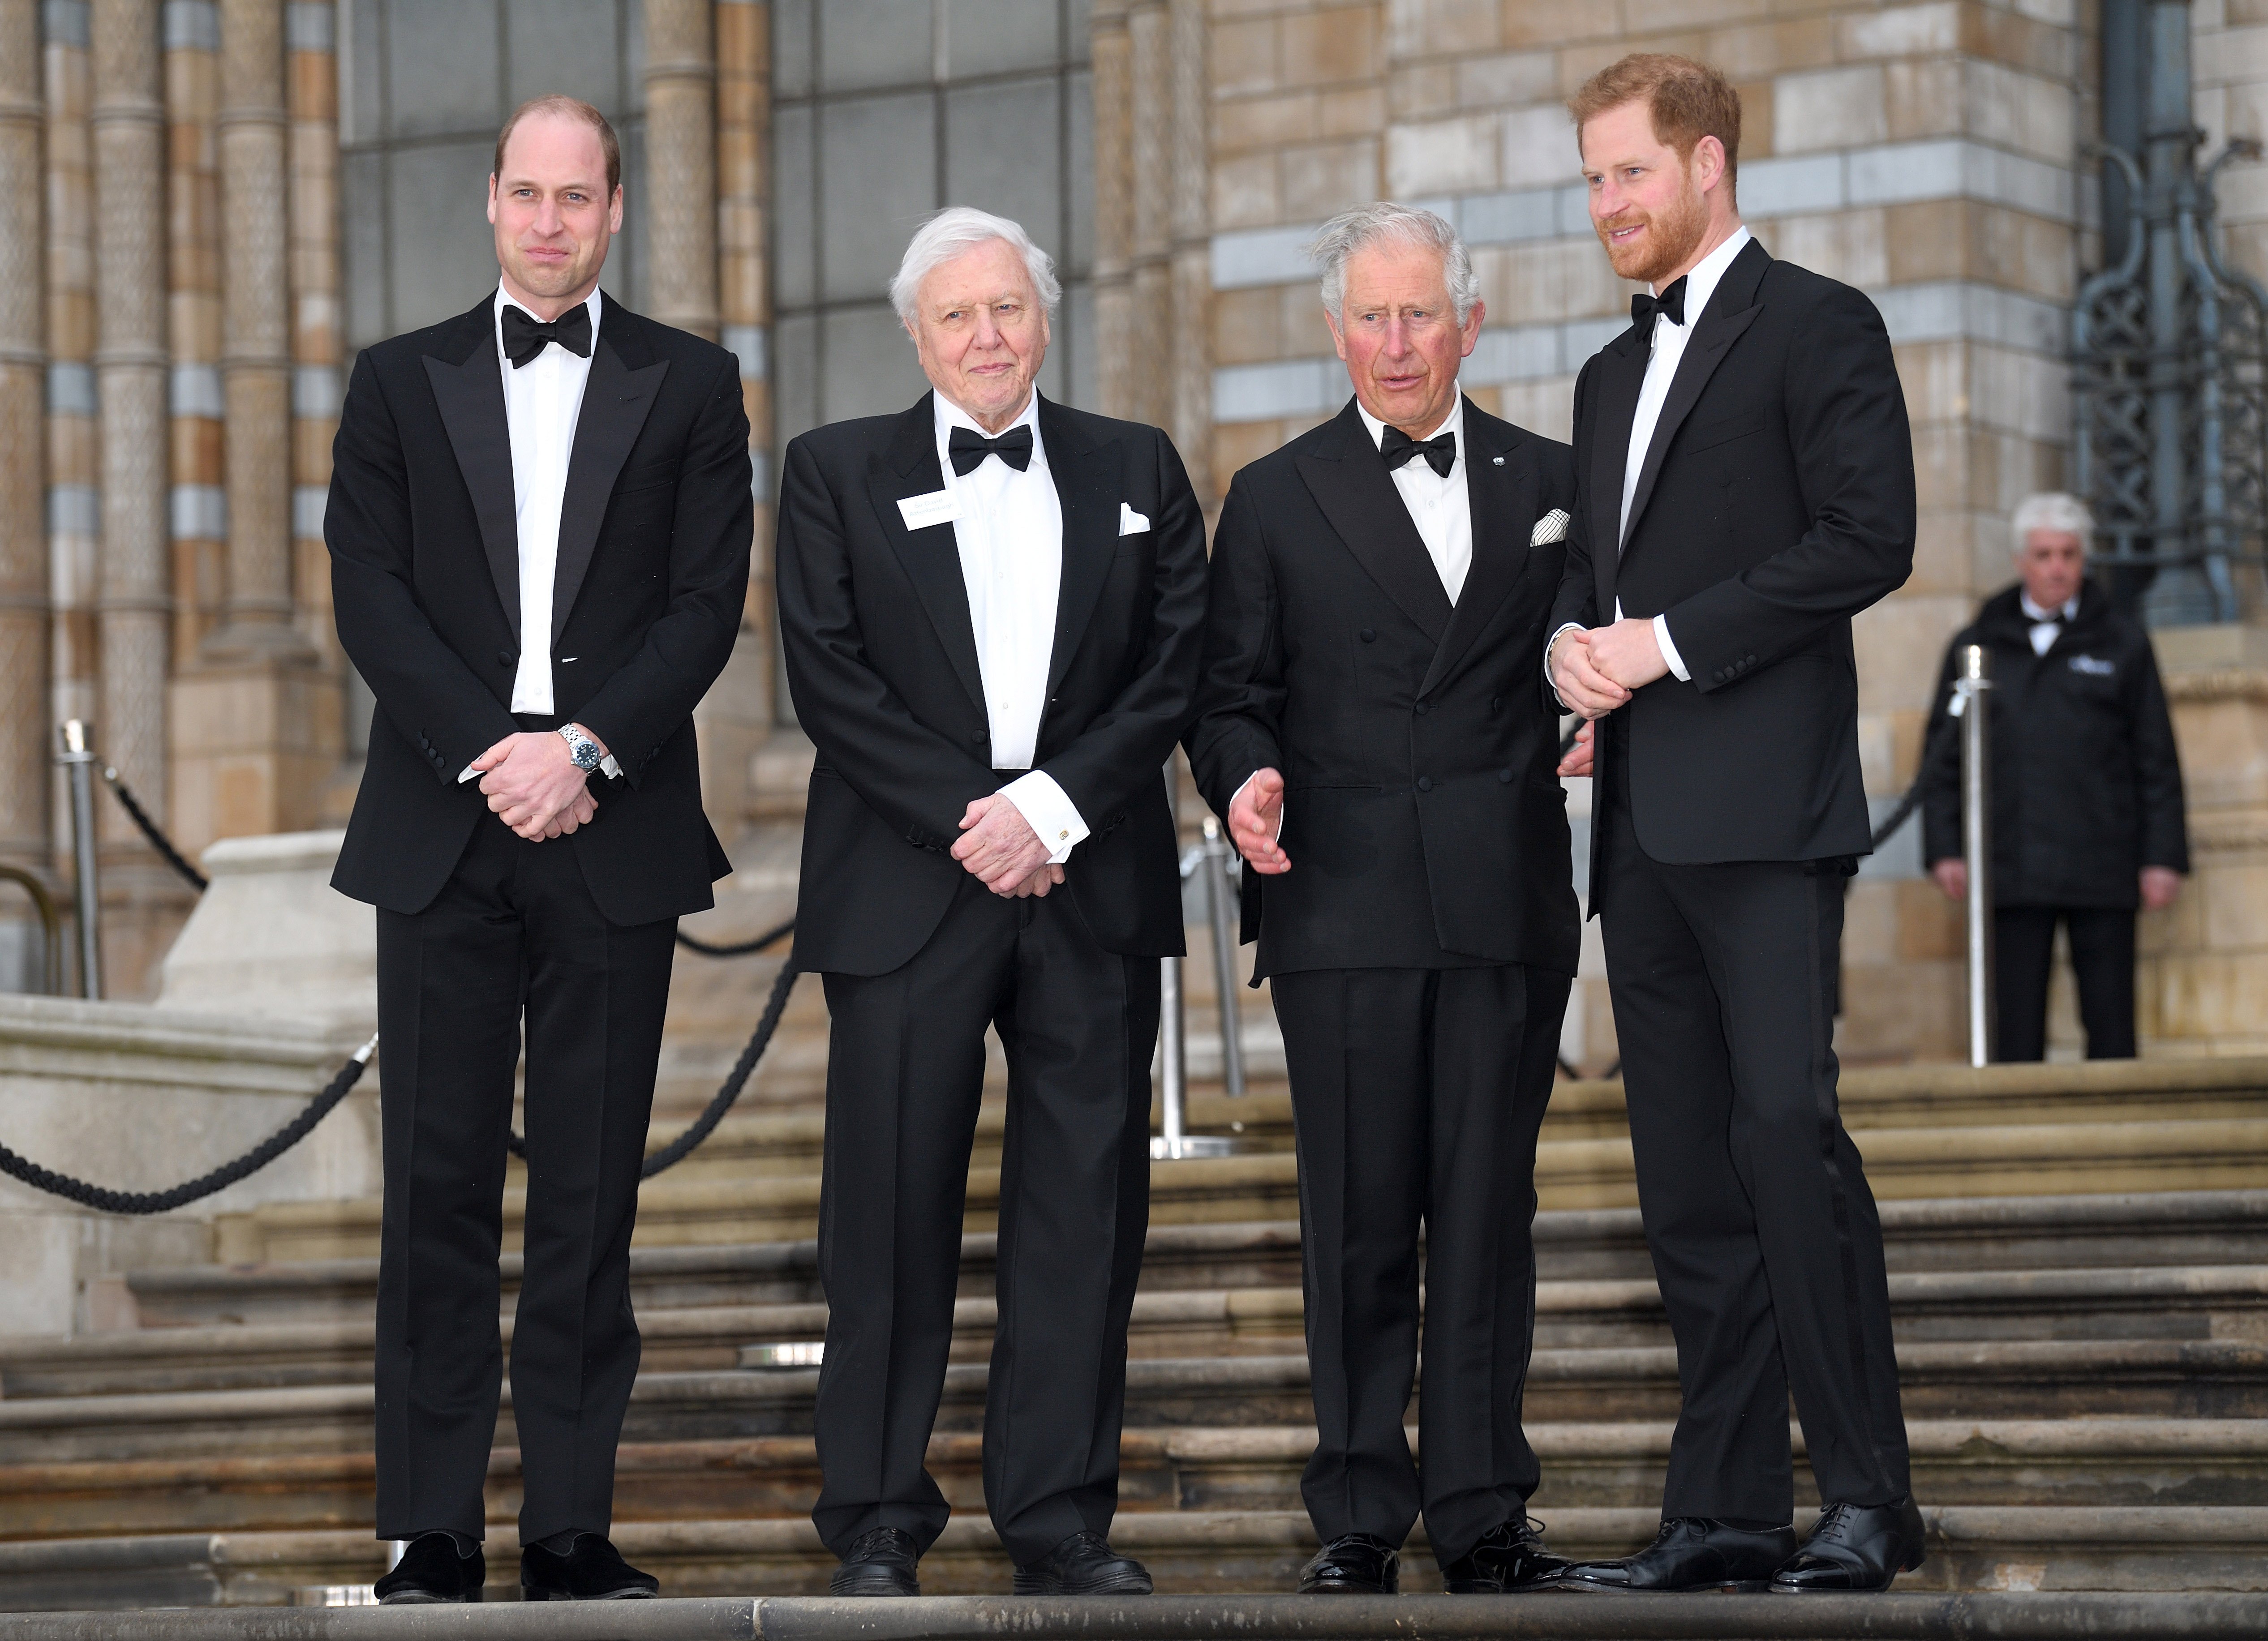 Prince William, Sir David Attenborough, Prince Charles, and Prince Harry attend the "Our Planet" global premiere at Natural History Museum on April 04, 2019 in London, England. | Source: Getty Images